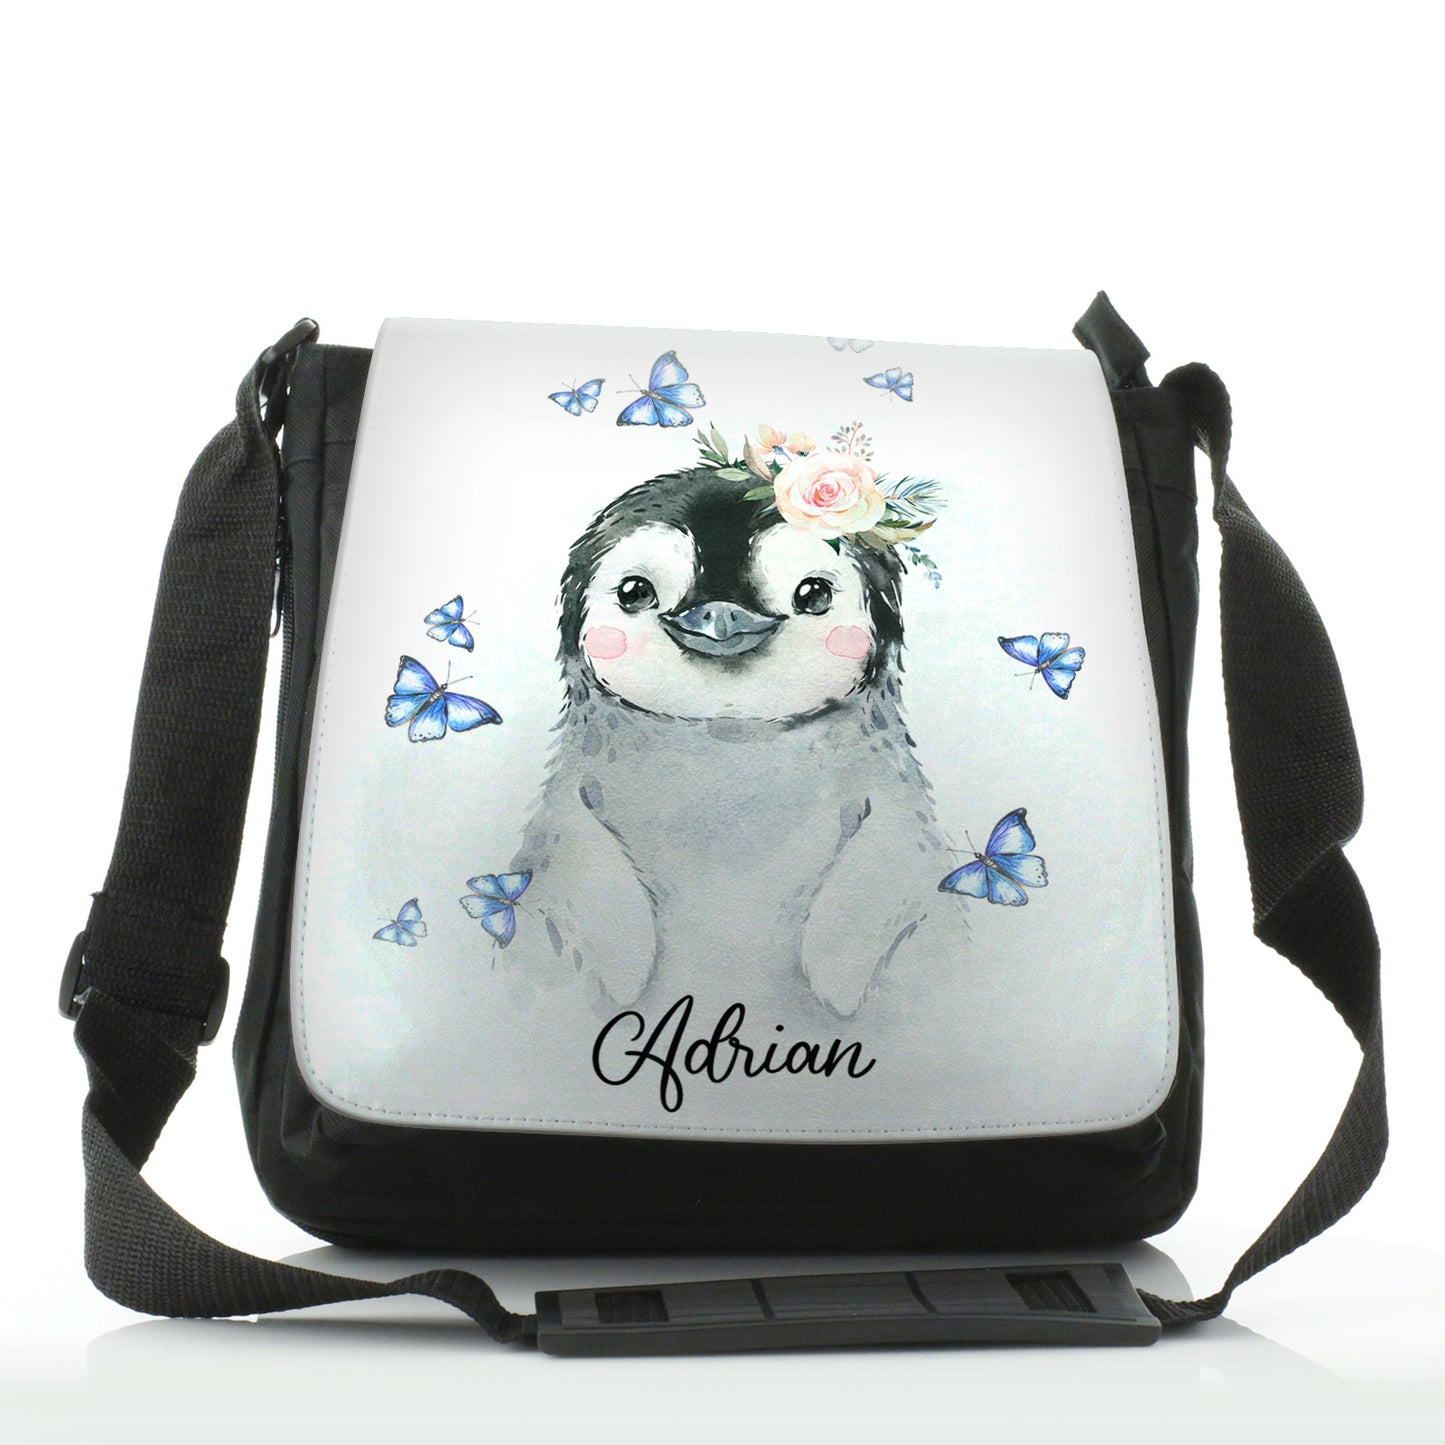 Personalised Shoulder Bag with Grey Penguin Blue Butterflies and Cute Text